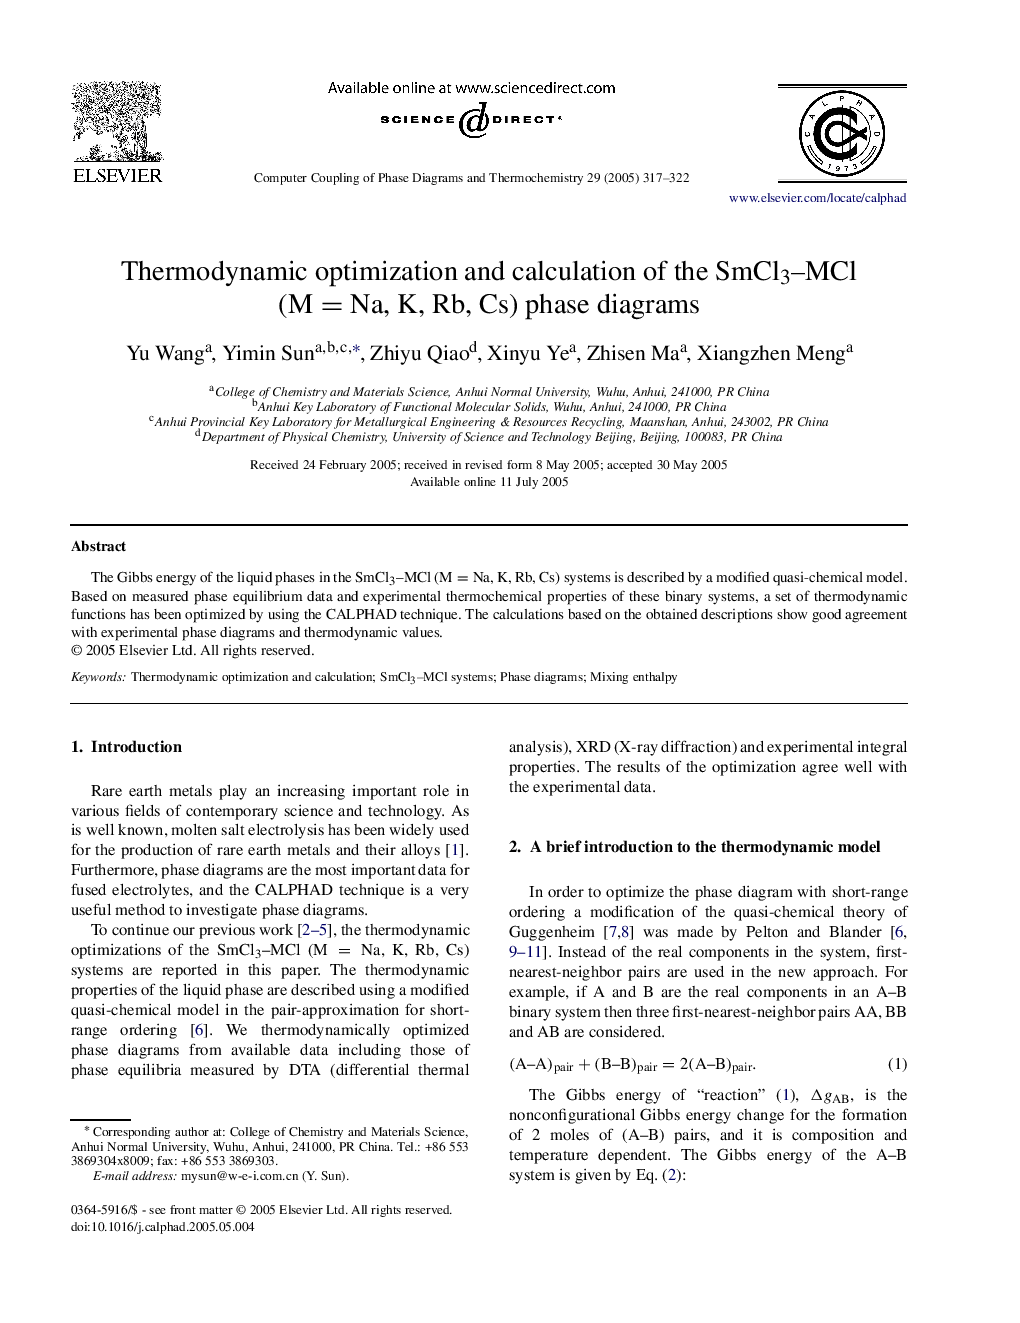 Thermodynamic optimization and calculation of the SmCl3-MCl (M=Na, K, Rb, Cs) phase diagrams